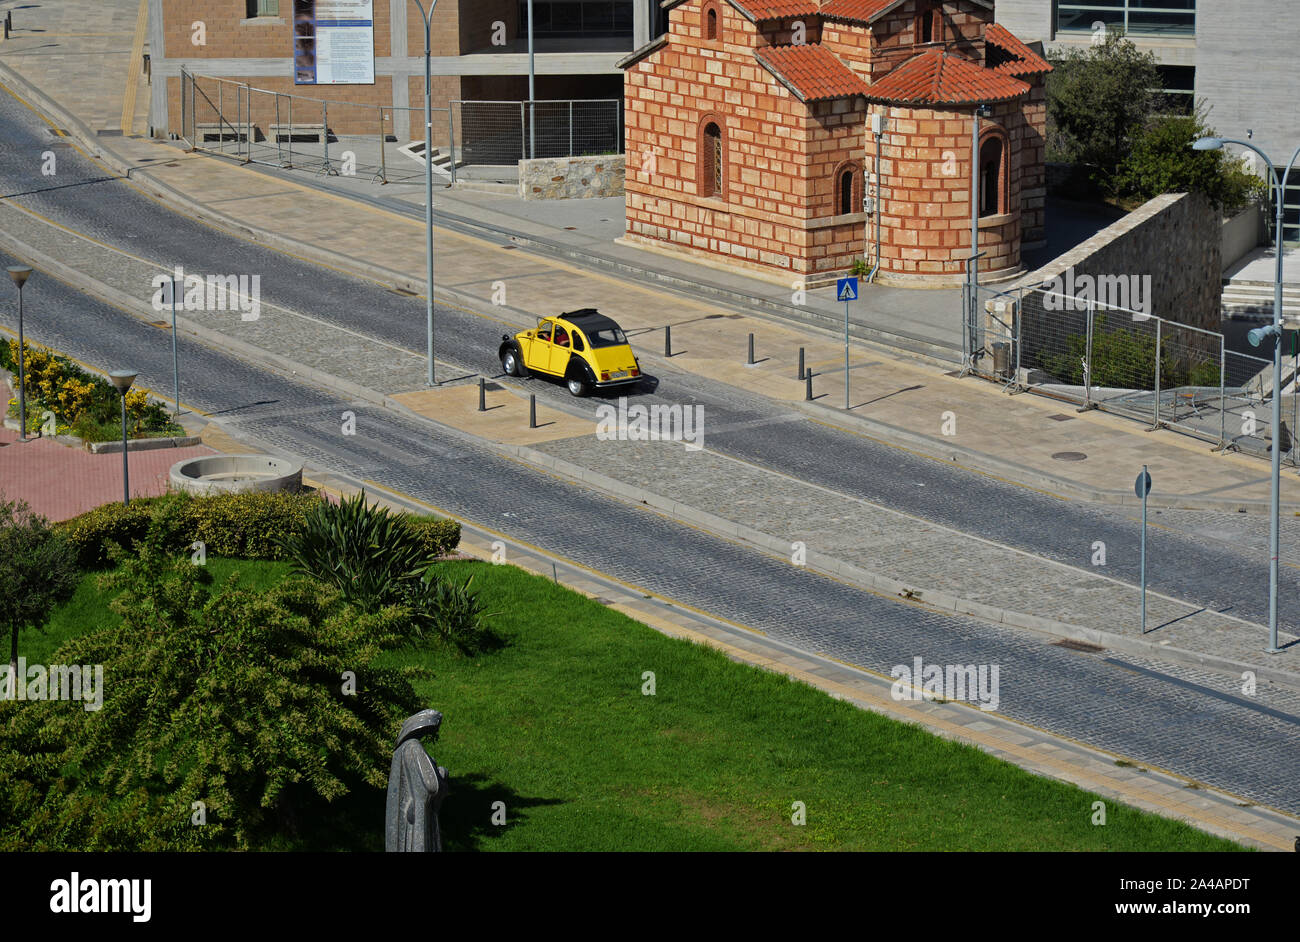 Yellow Citroen 2CV vintage car with a sunroof passing over a zebra crossing at Heraklion, Crete, Greece. Stock Photo